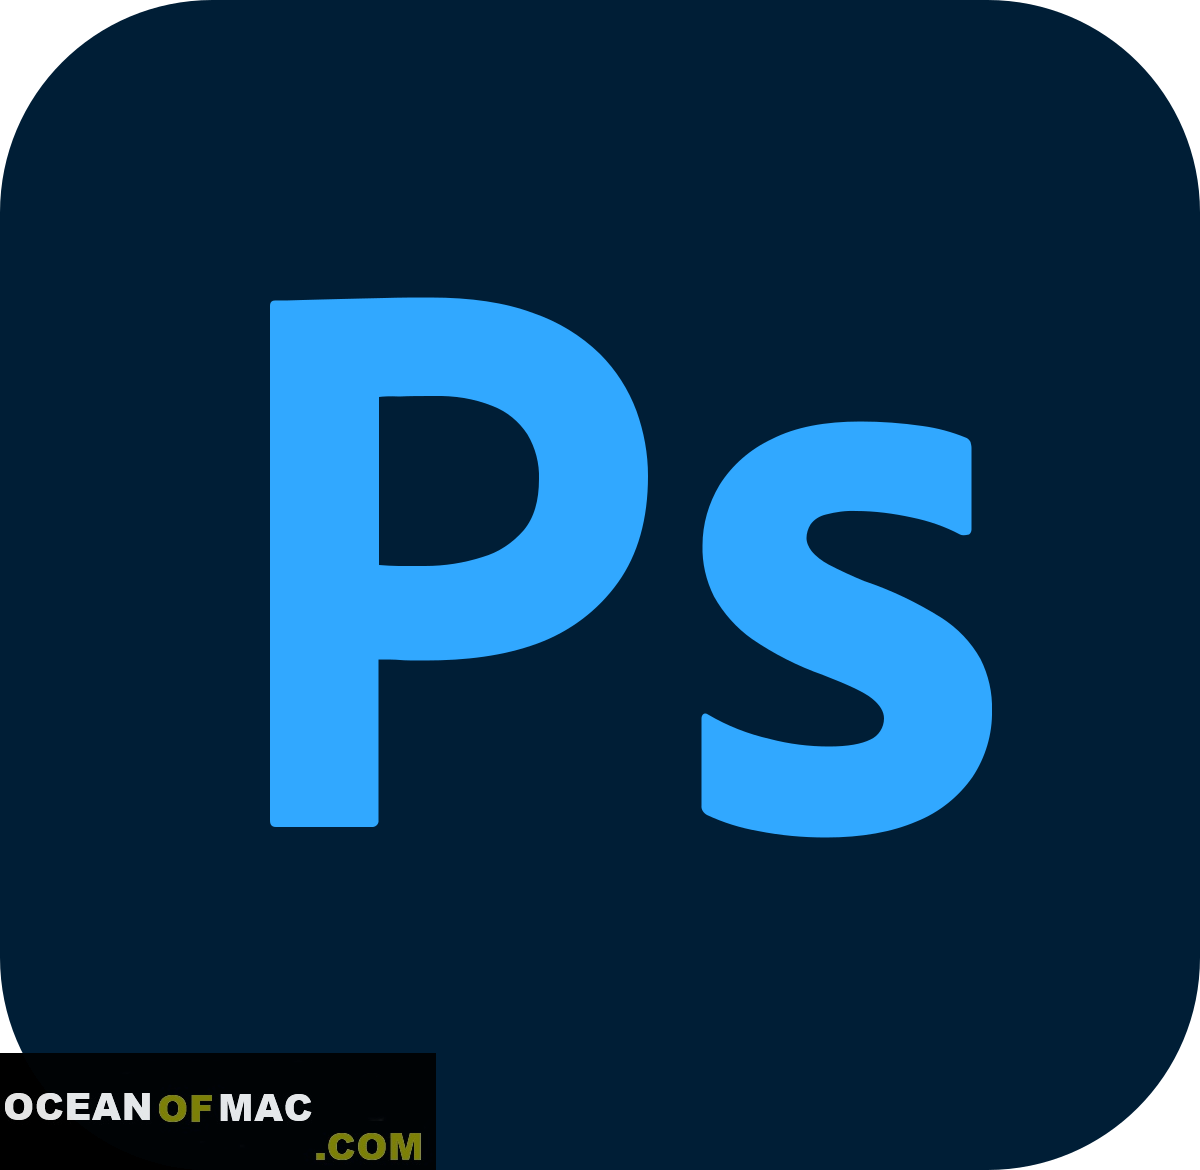 adobe photoshop 2022 for mac free download